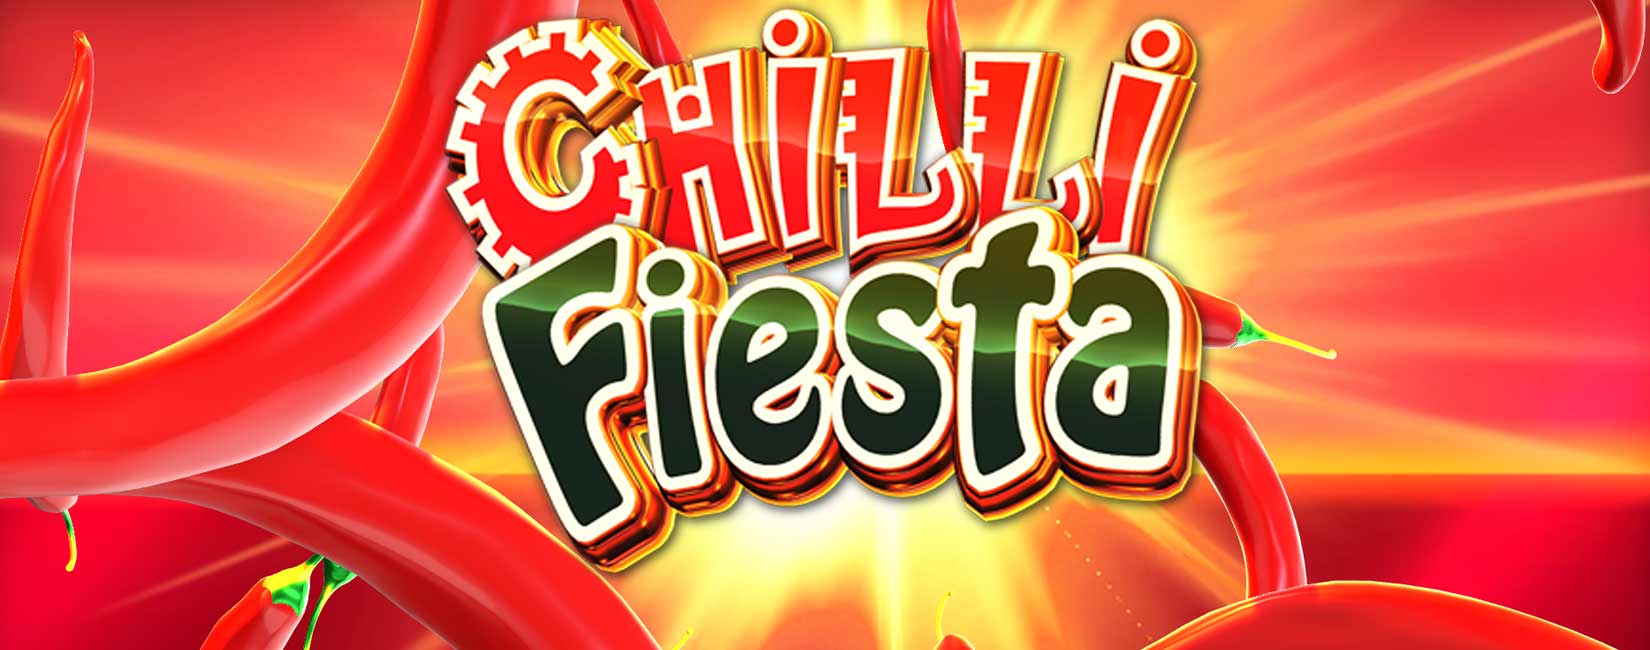 CRE-249285-May Game Reviews Pages-GB-static-pp-1650x650-chilli-fiesta